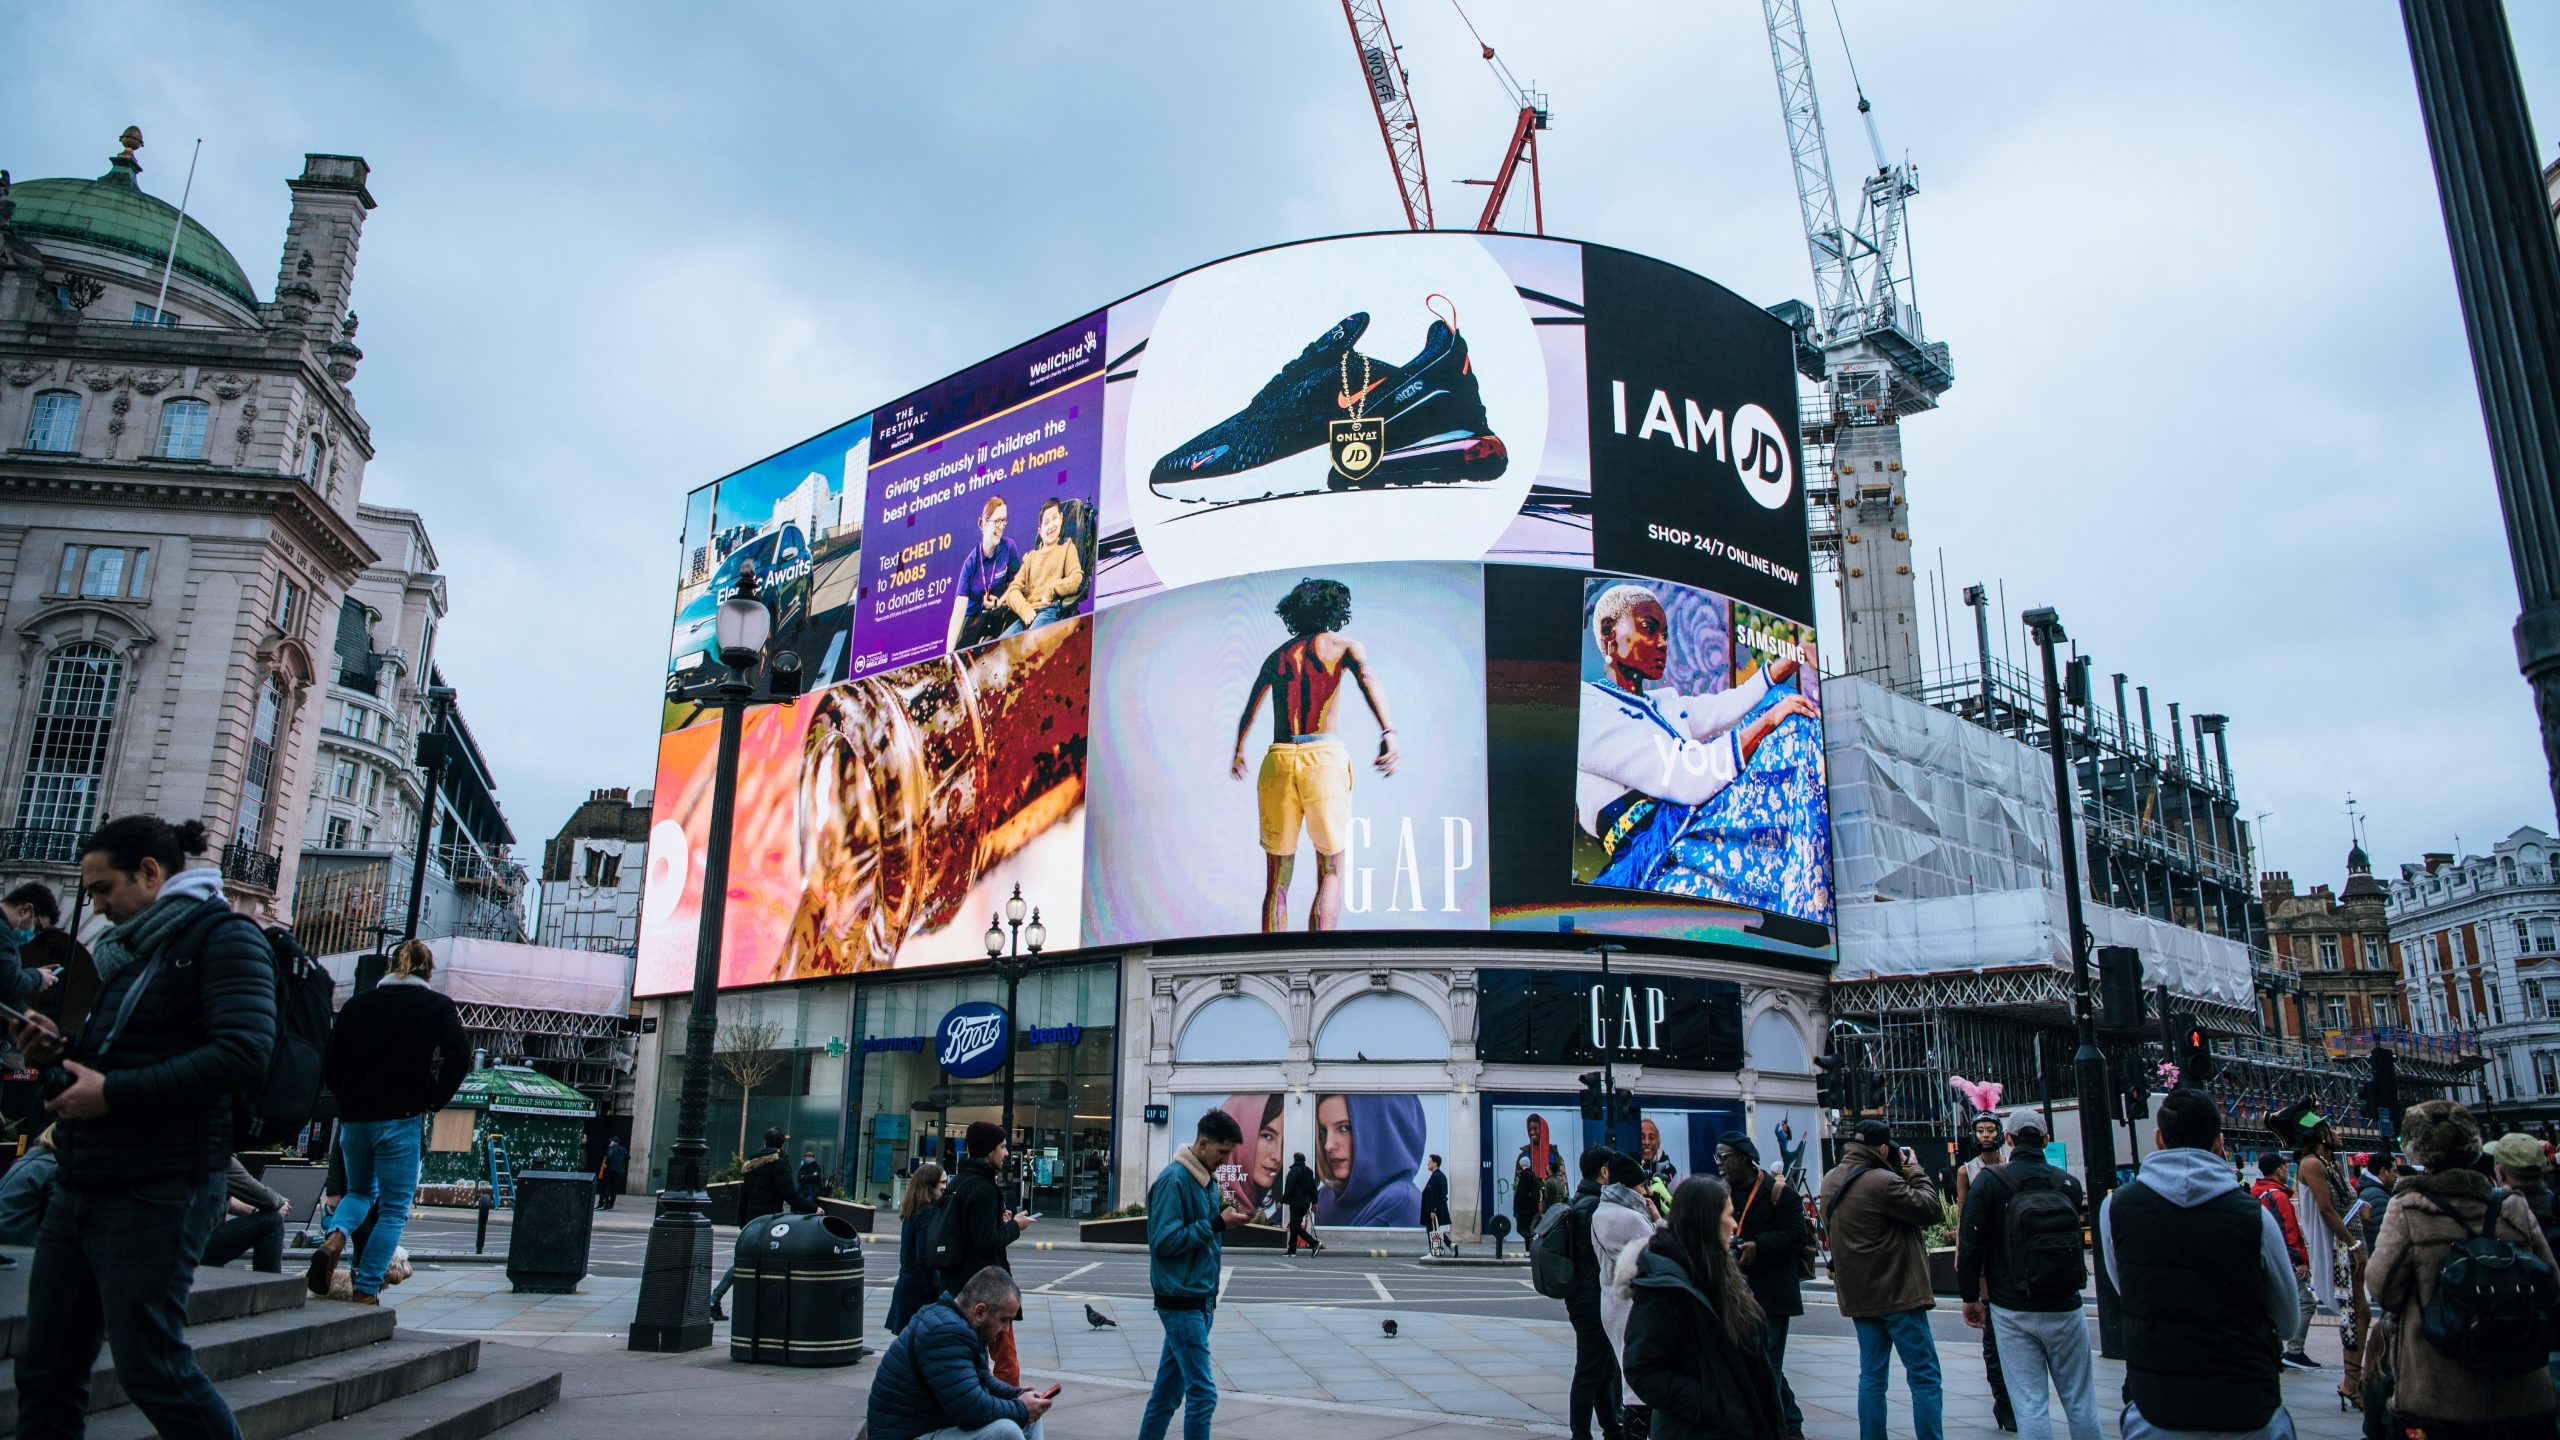 London Piccadilly Circus digital screens, featuring adverts by well-known retailers and brands.